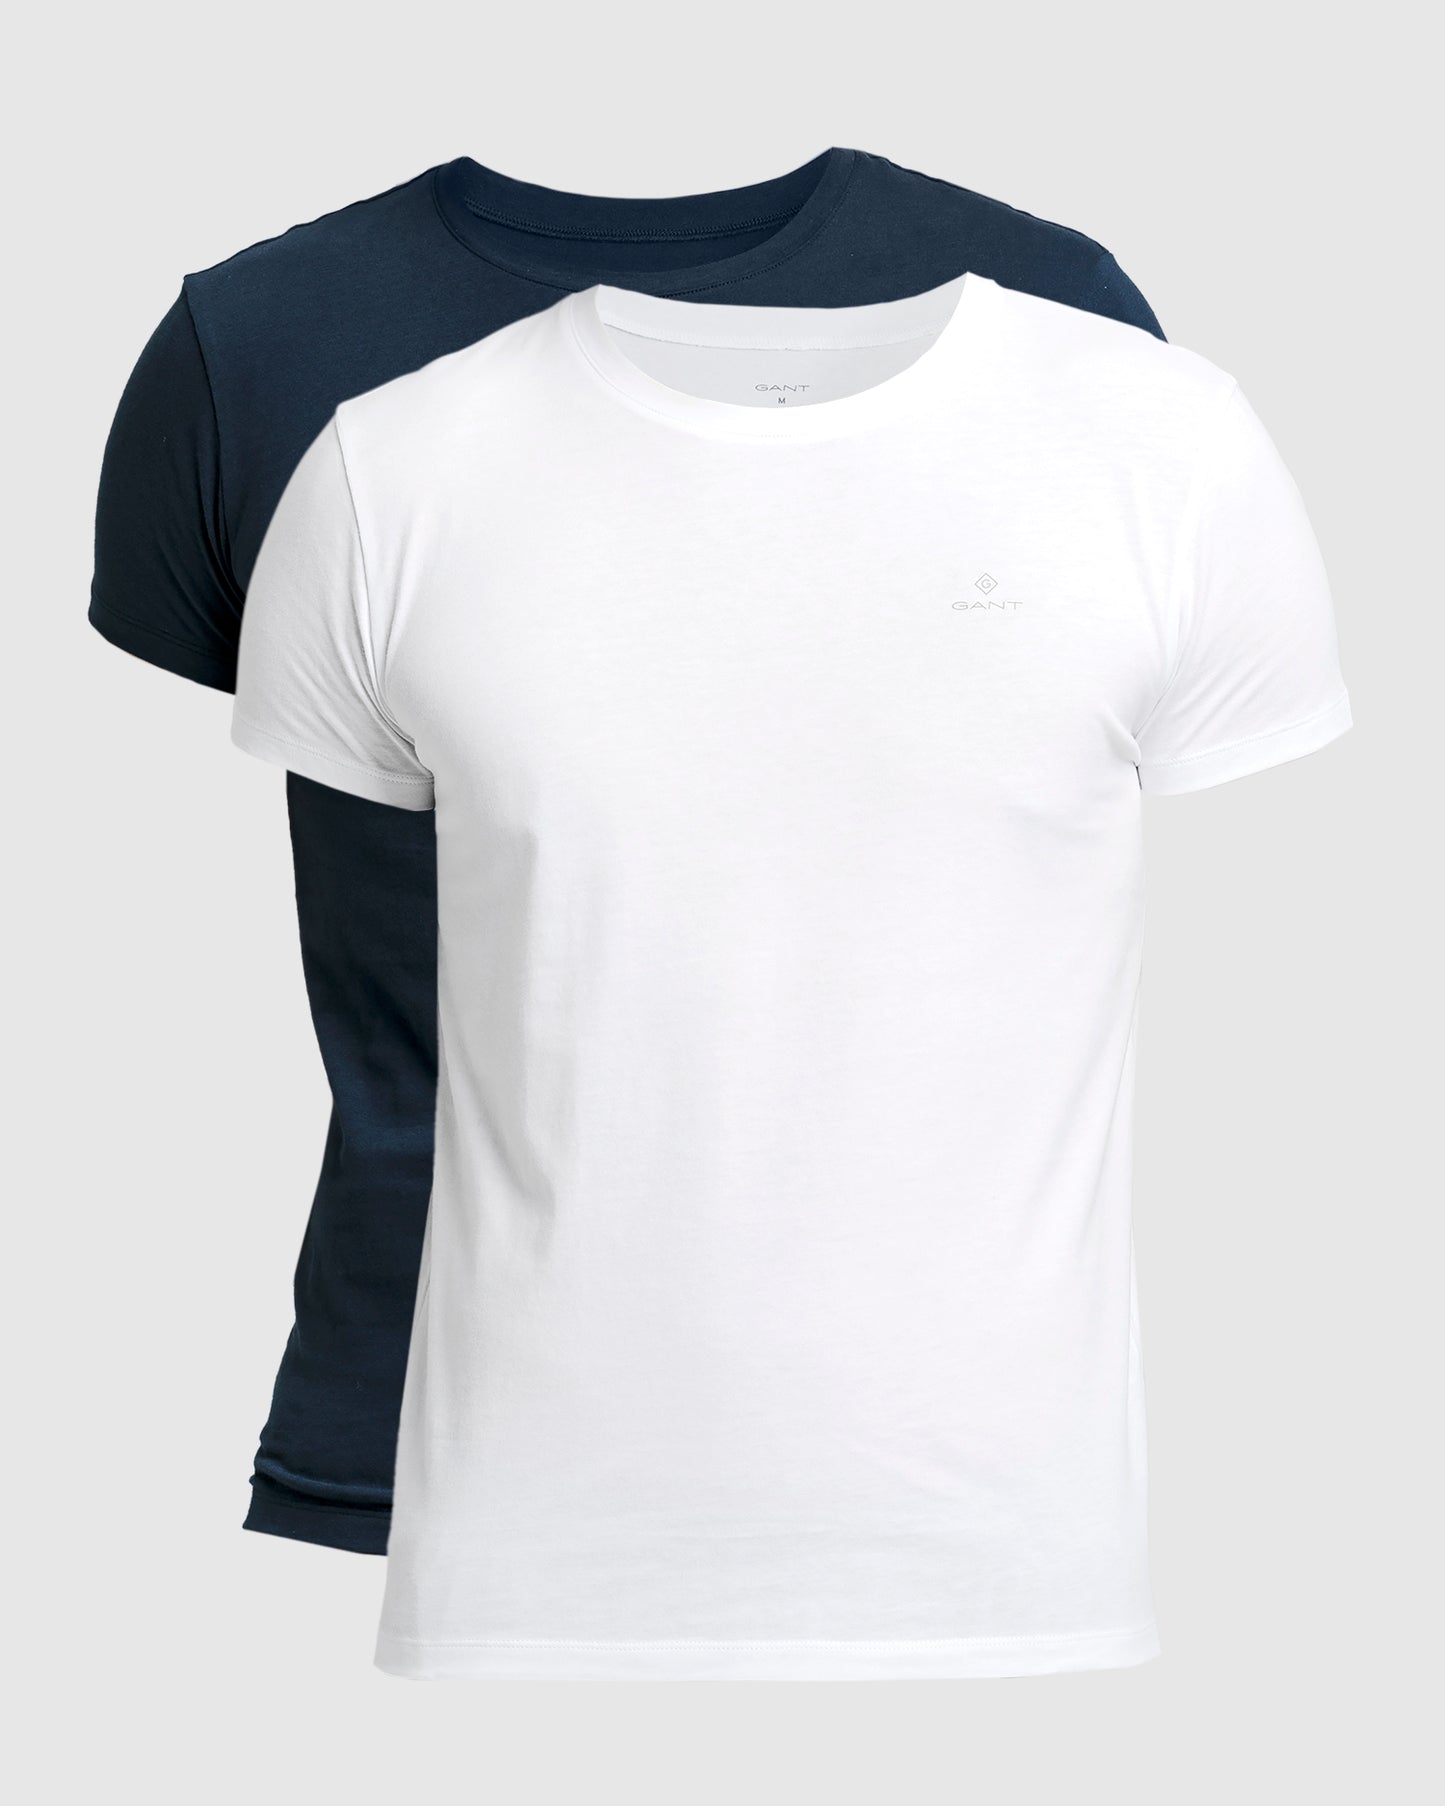 Gant C-Neck T-Shirt -Pack, in regular classic fit.    chosen in a Navy / White  colour. (901002108)